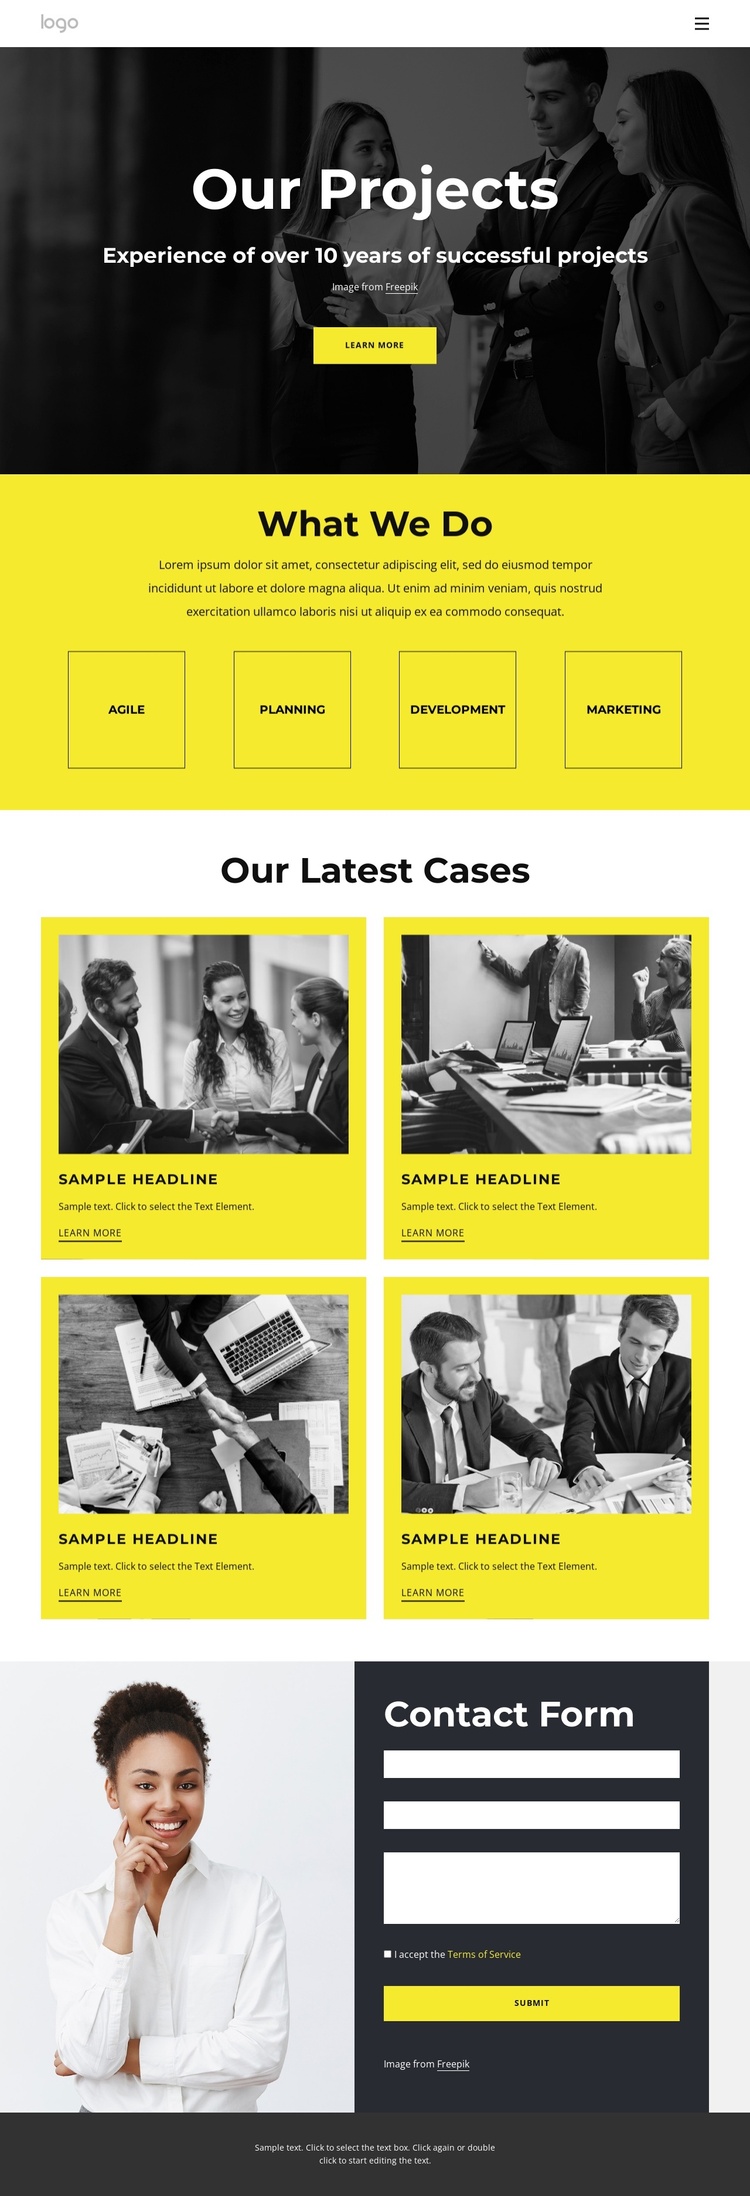 Our consulting success stories Joomla Template